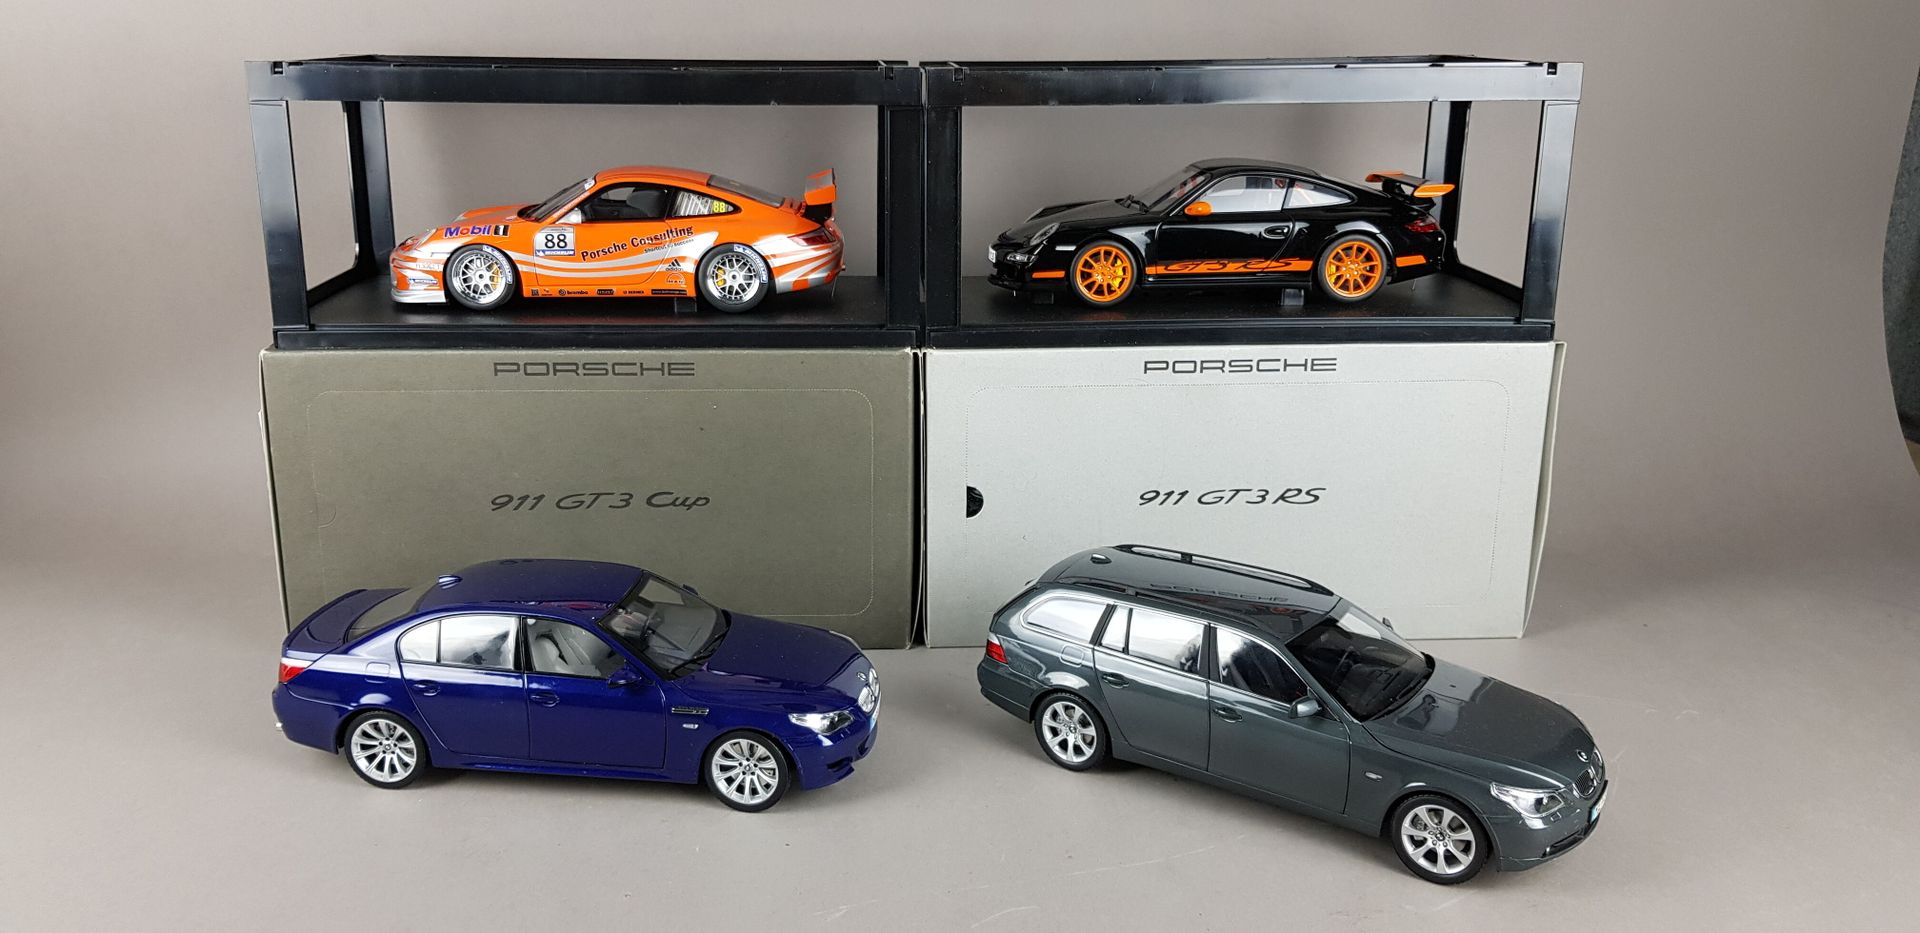 Null FOUR CARS scale 1/18 :

1x from BMW, a BMW 5Series Touring

1x from Porsche&hellip;